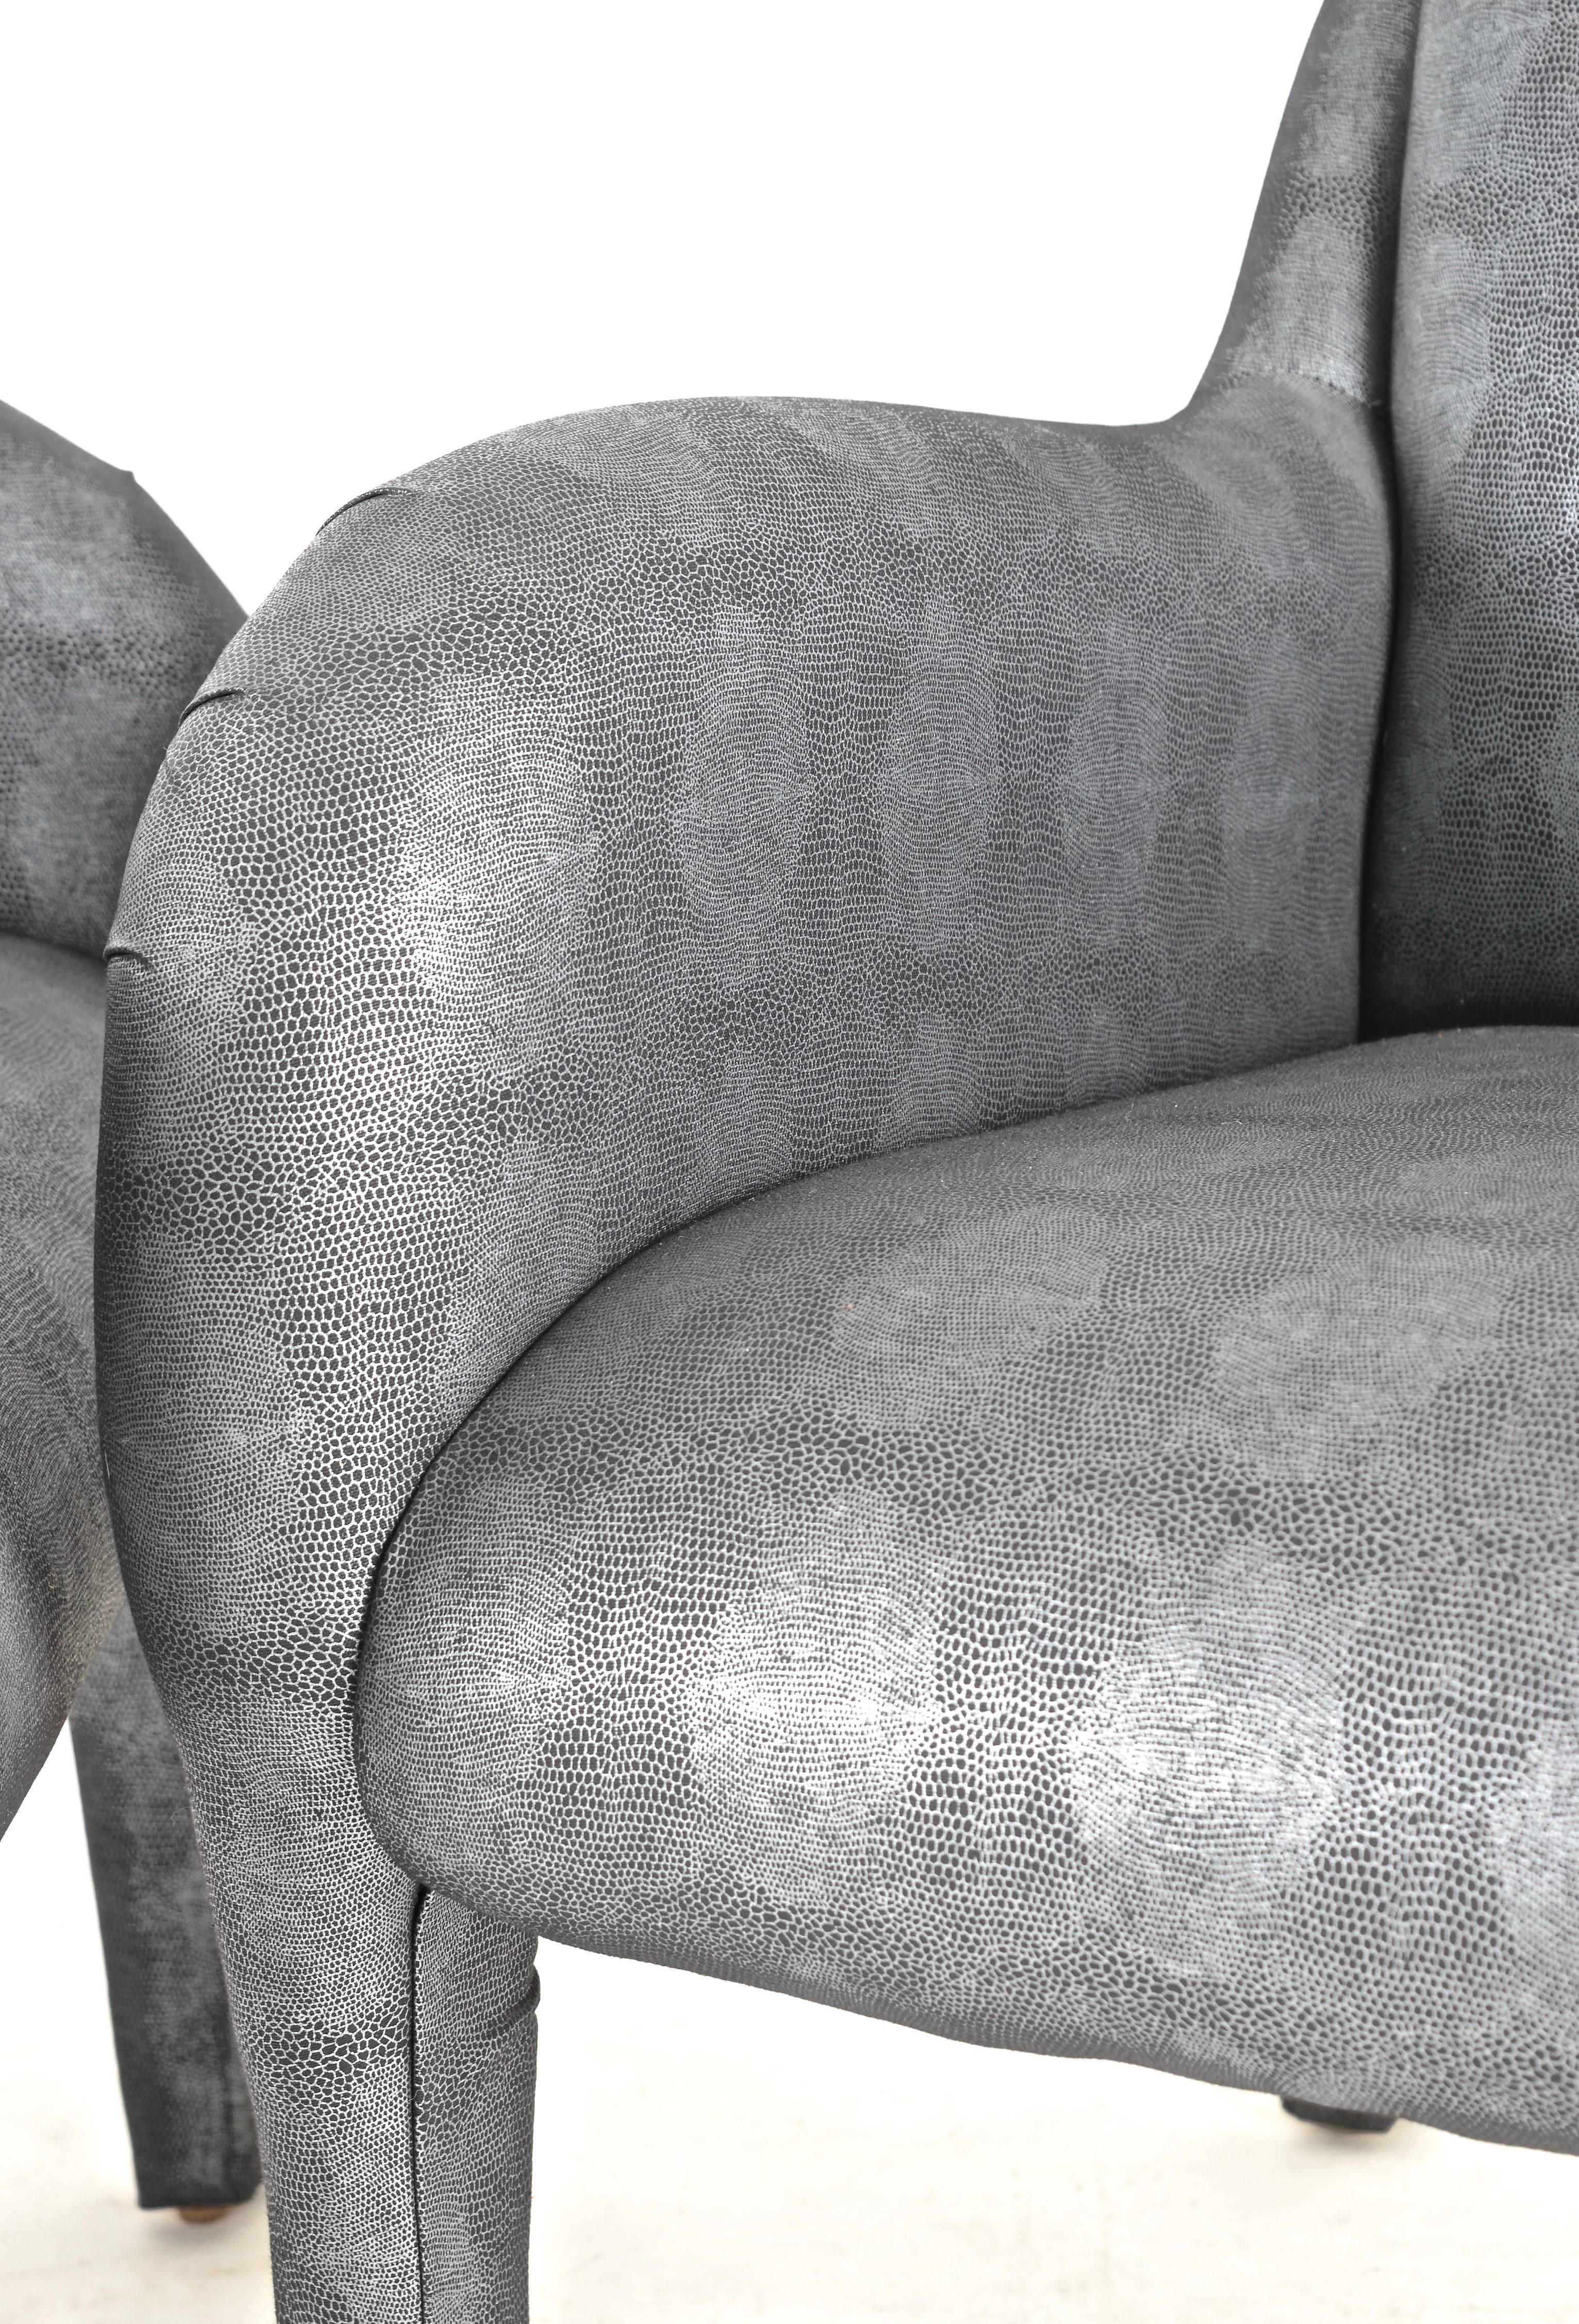 Pair of 1980s Armchairs in Metallic Faux Shagreen  2